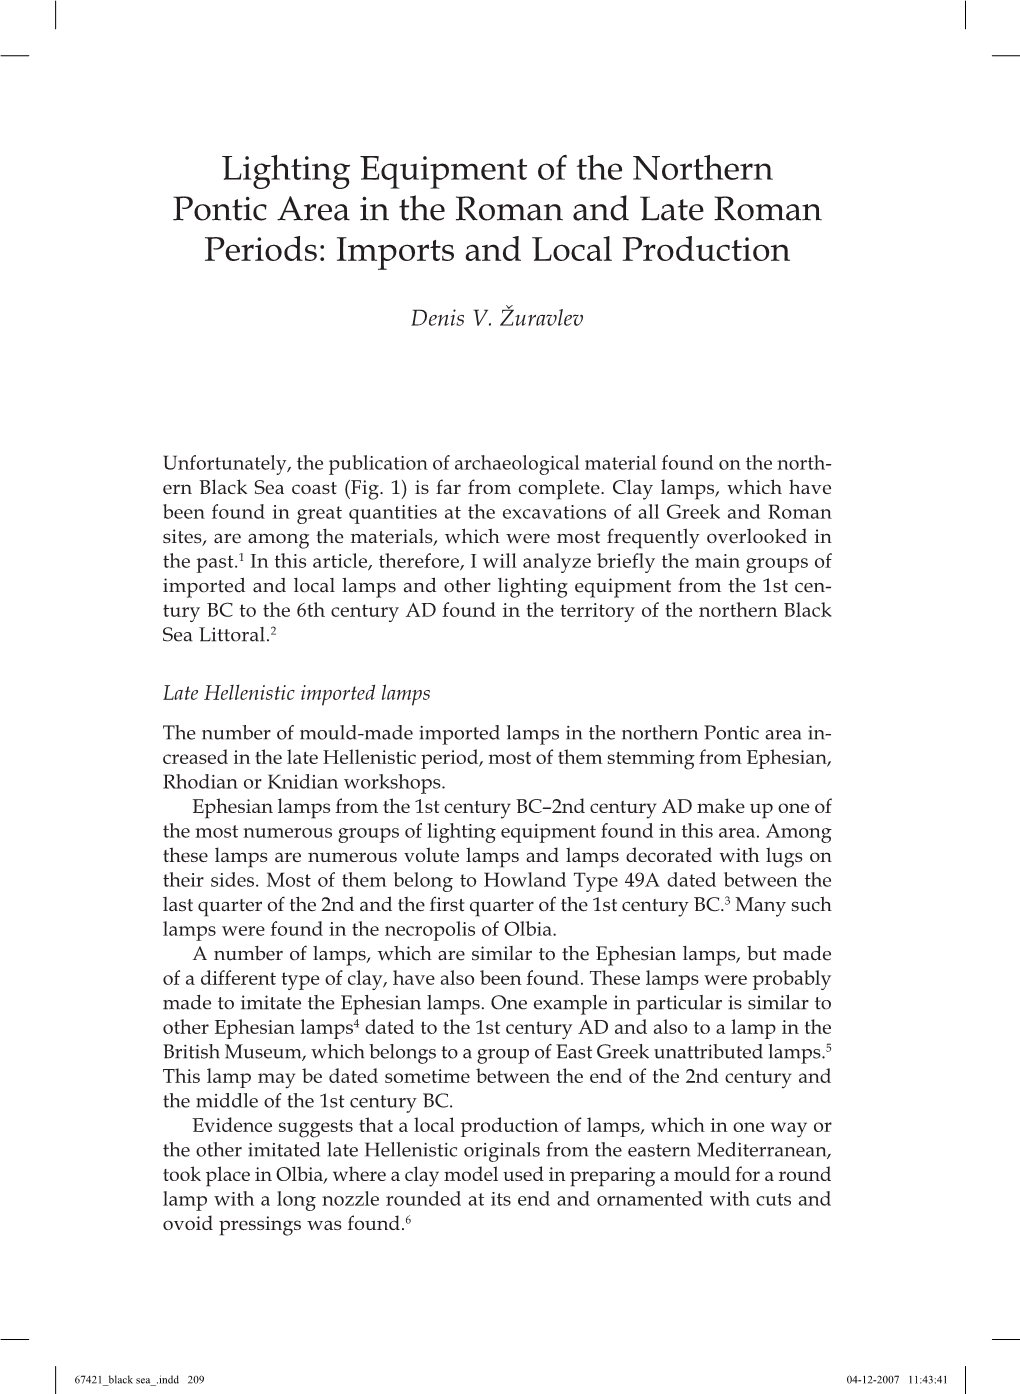 Lighting Equipment of the Northern Pontic Area in the Roman and Late Roman Periods: Imports and Local Production